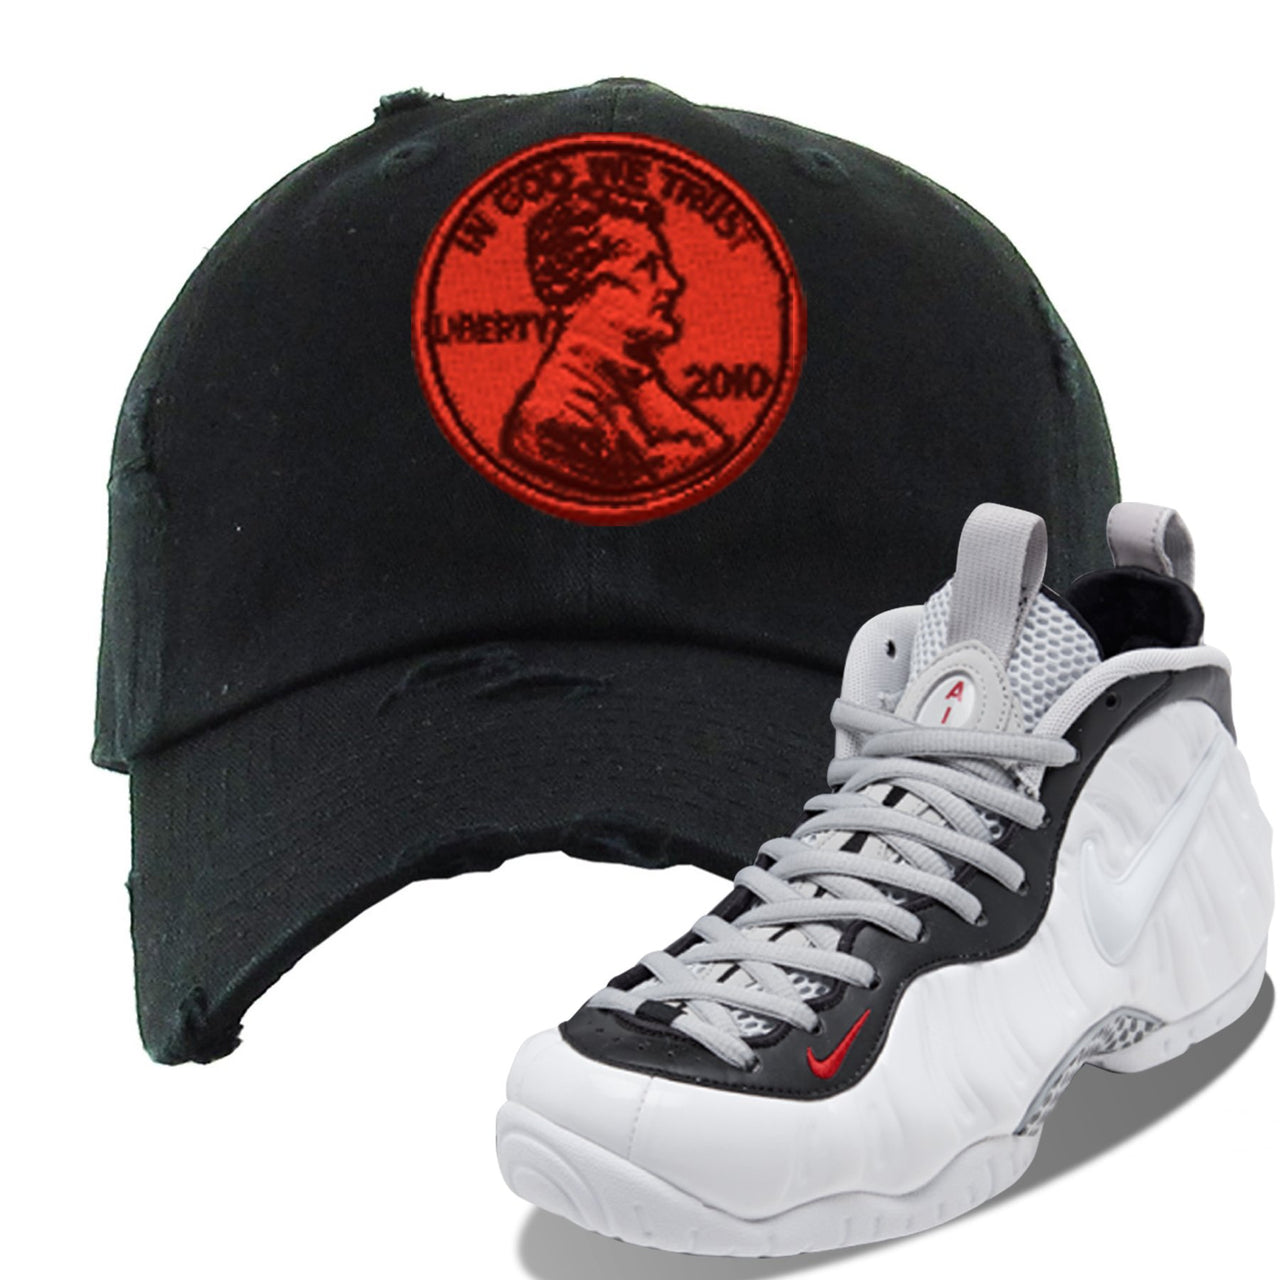 Foamposite Pro White Black University Red Sneaker Black Distressed Dad Hat | Hat to match Nike Air Foamposite Pro White Black University Red Shoes | Penny